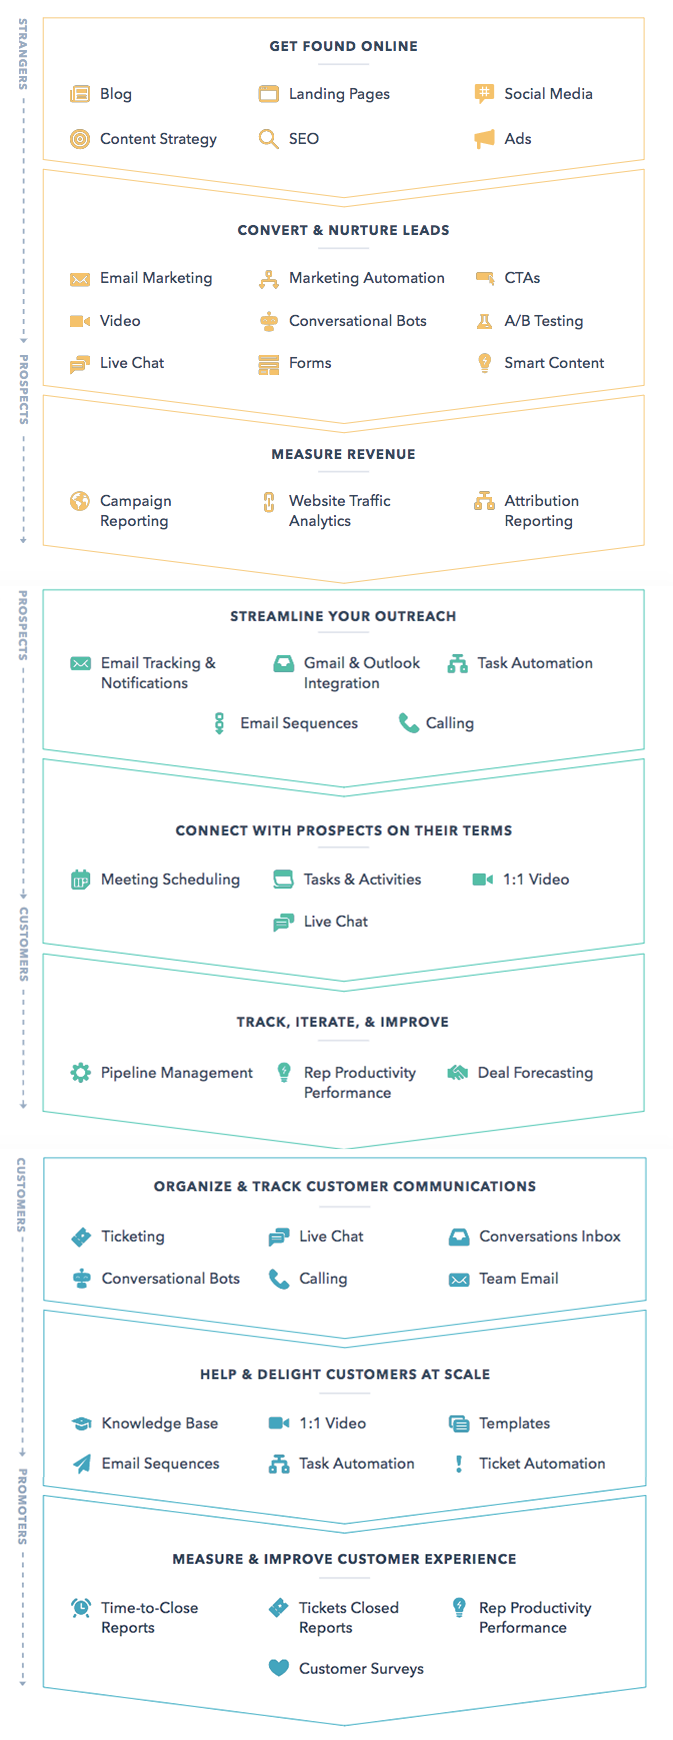 hubspot-tools-stages